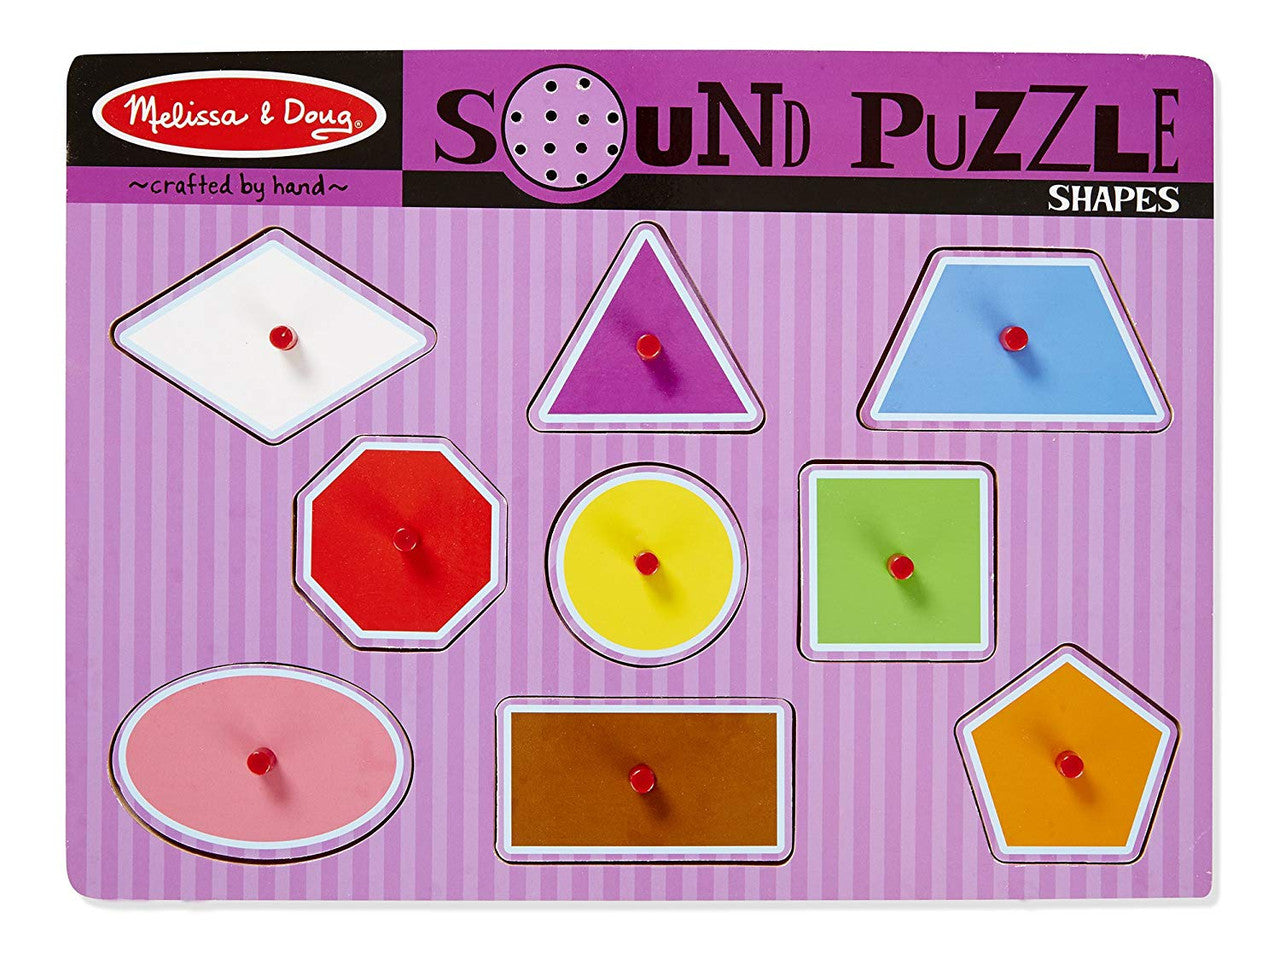 Melissa & Doug Sound Puzzle Shapes 9 Pcs. Ages 2+ Item # 728 Crafted by Hand